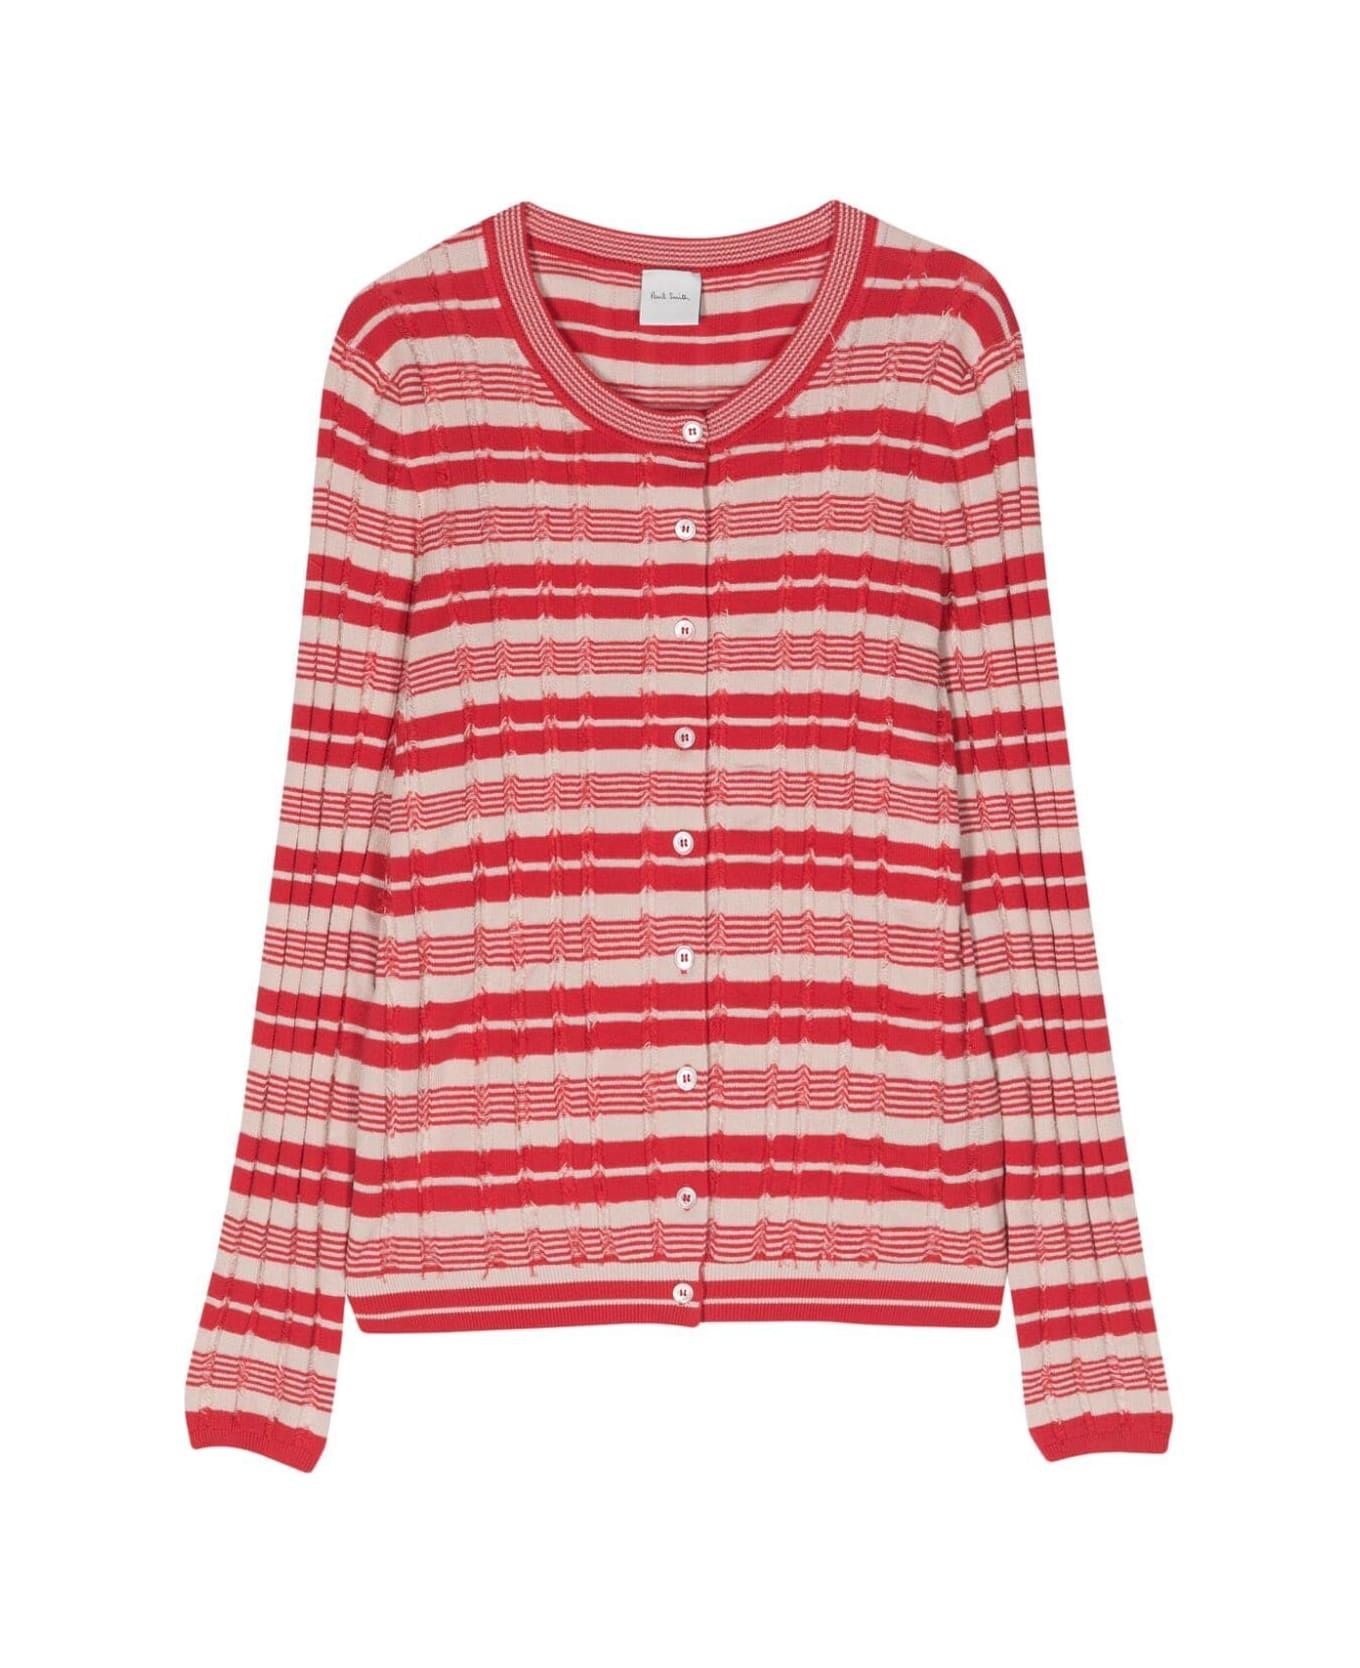 Paul Smith Long Sleeves Striped Korean Sweater - Red